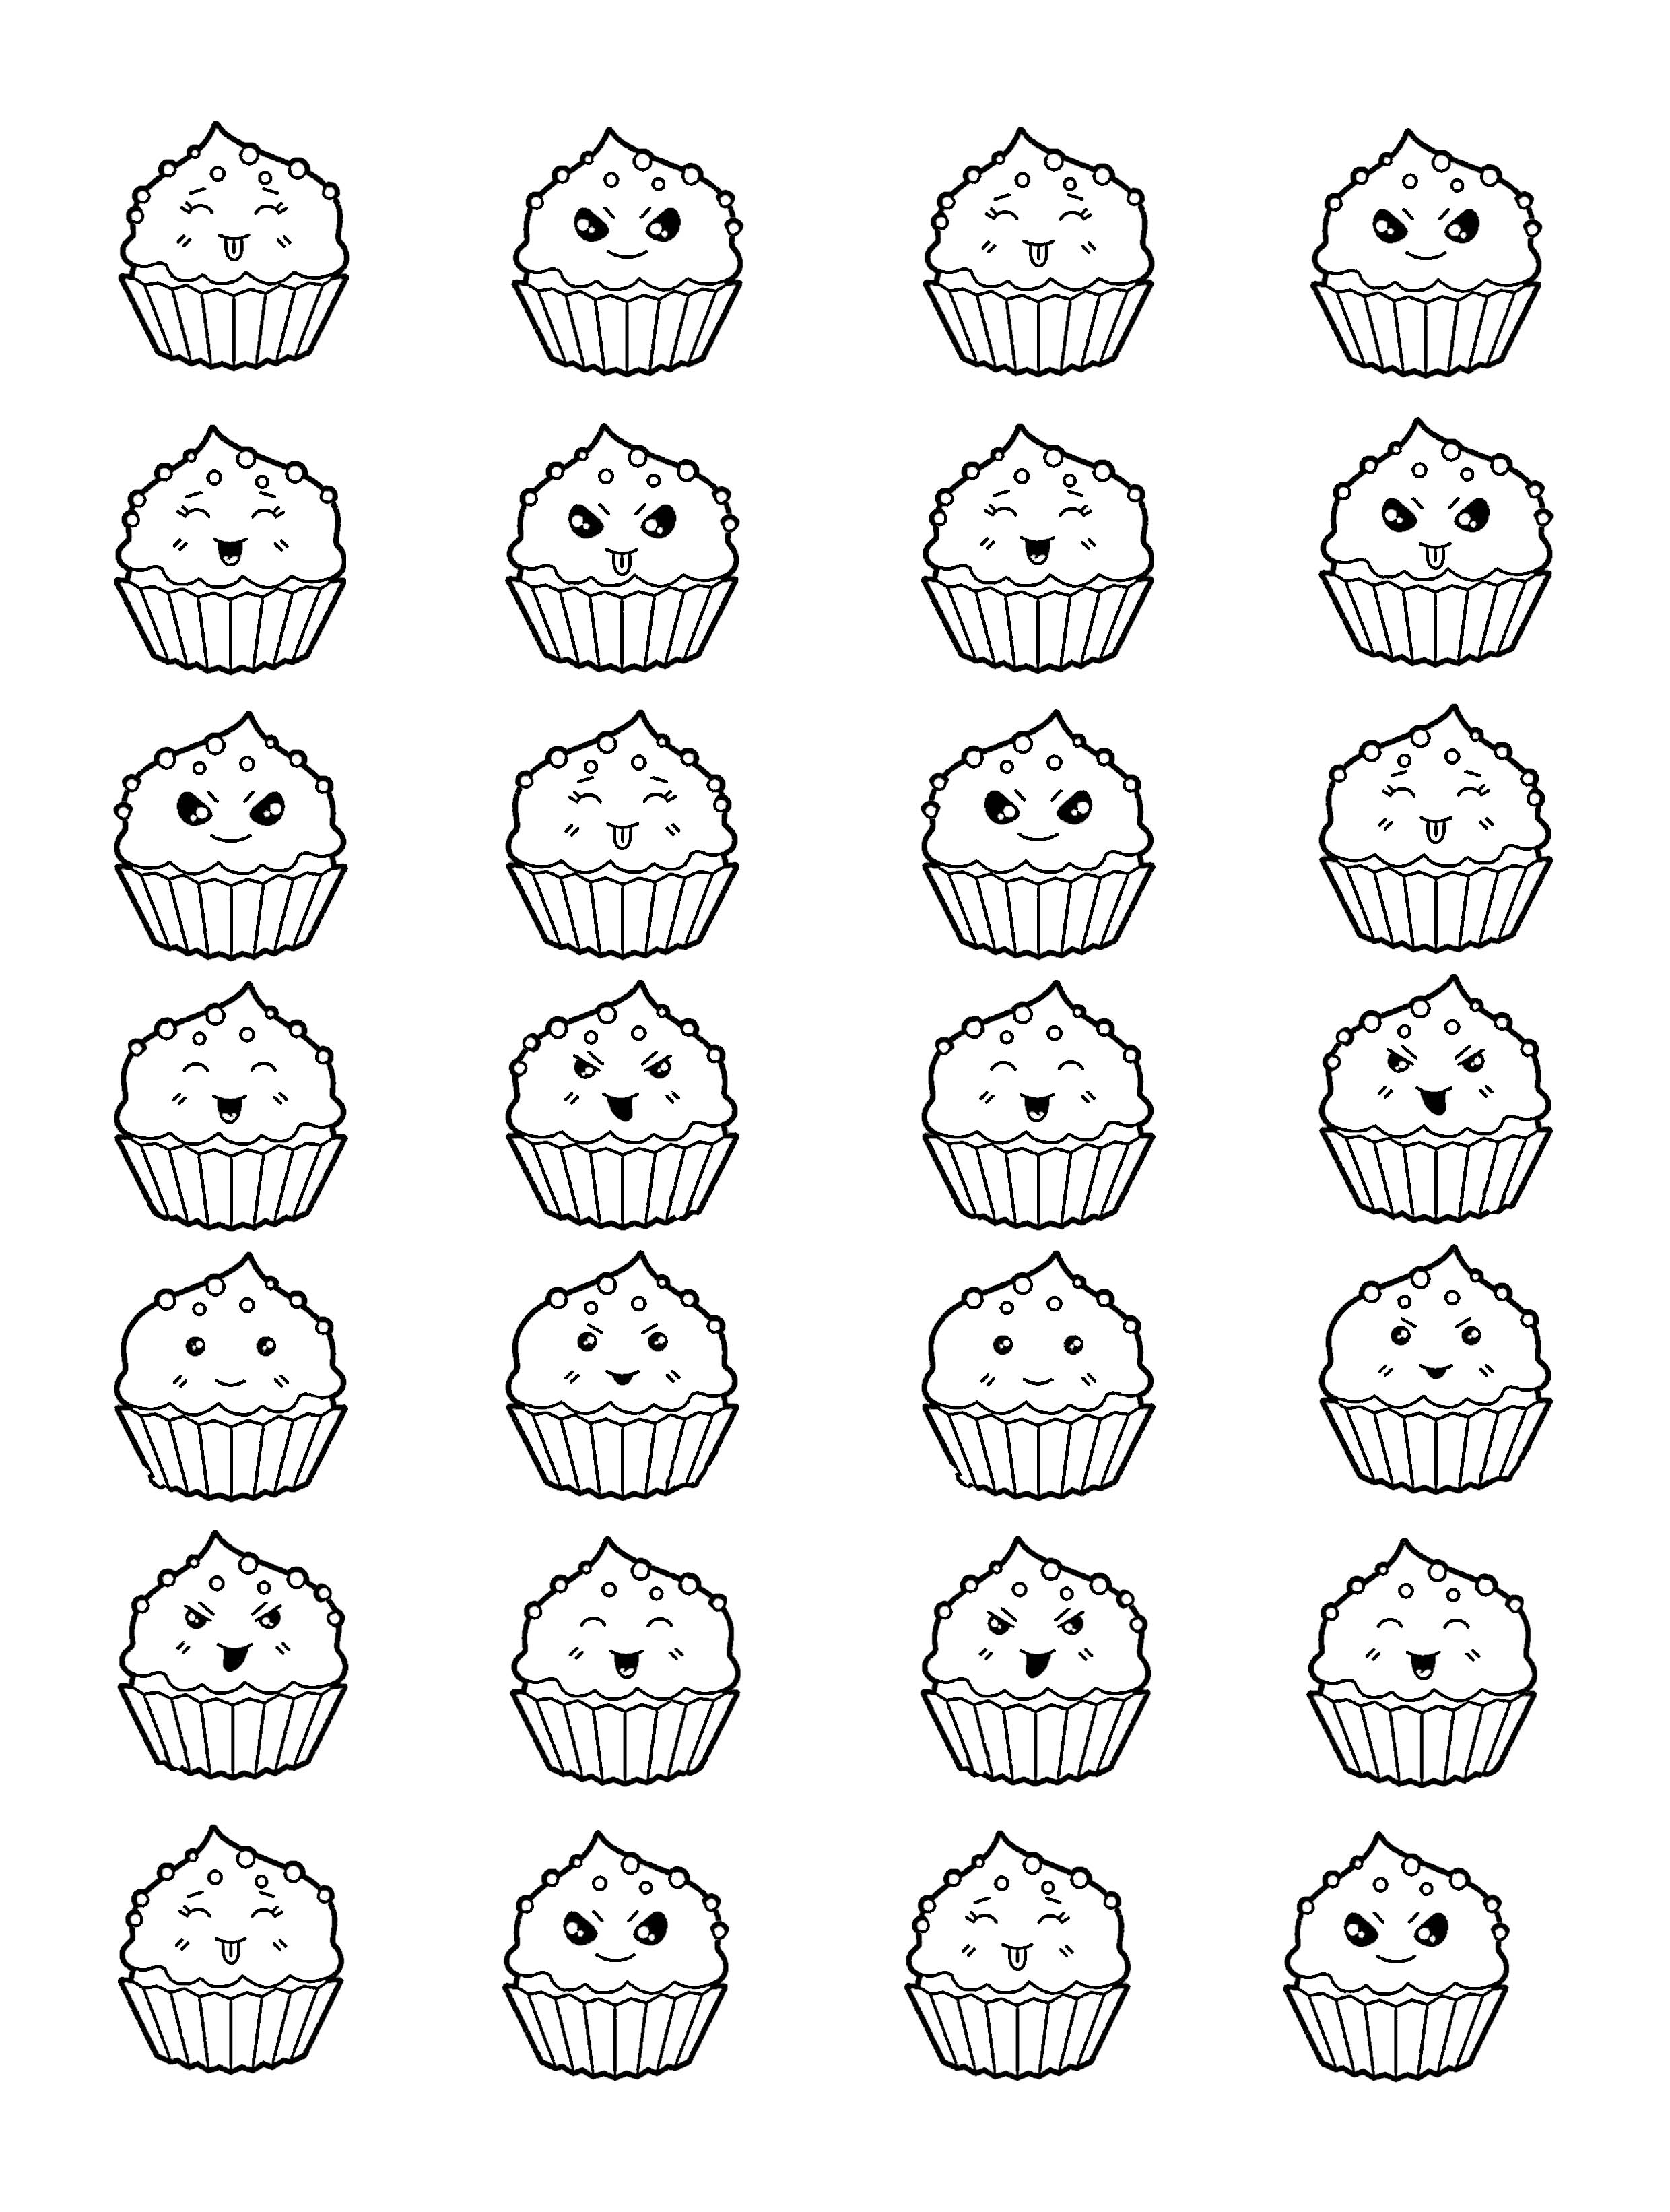 Cup cakes 82490